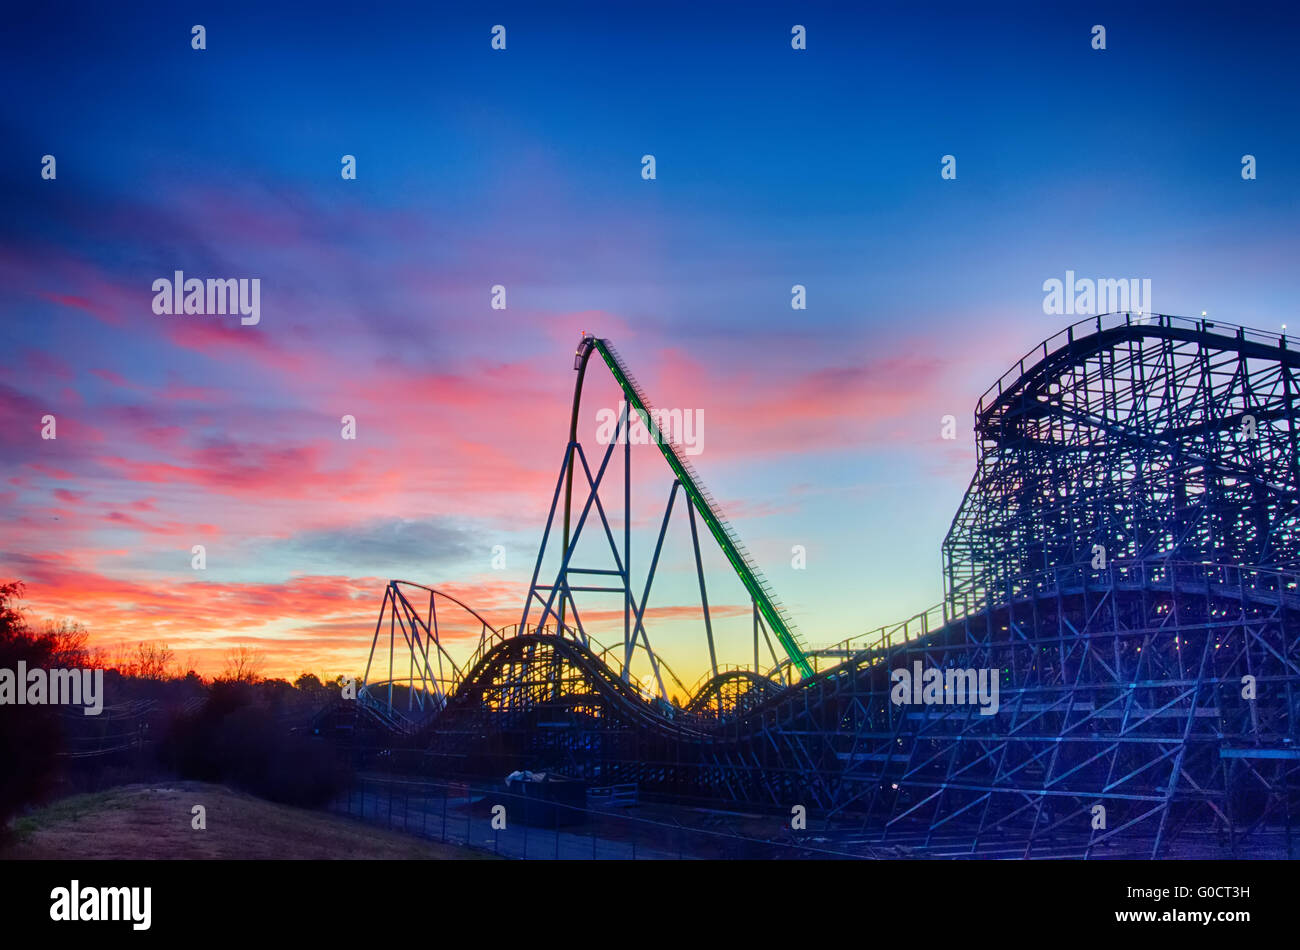 curves of a roller Coaster at Sunset or sunrise Stock Photo